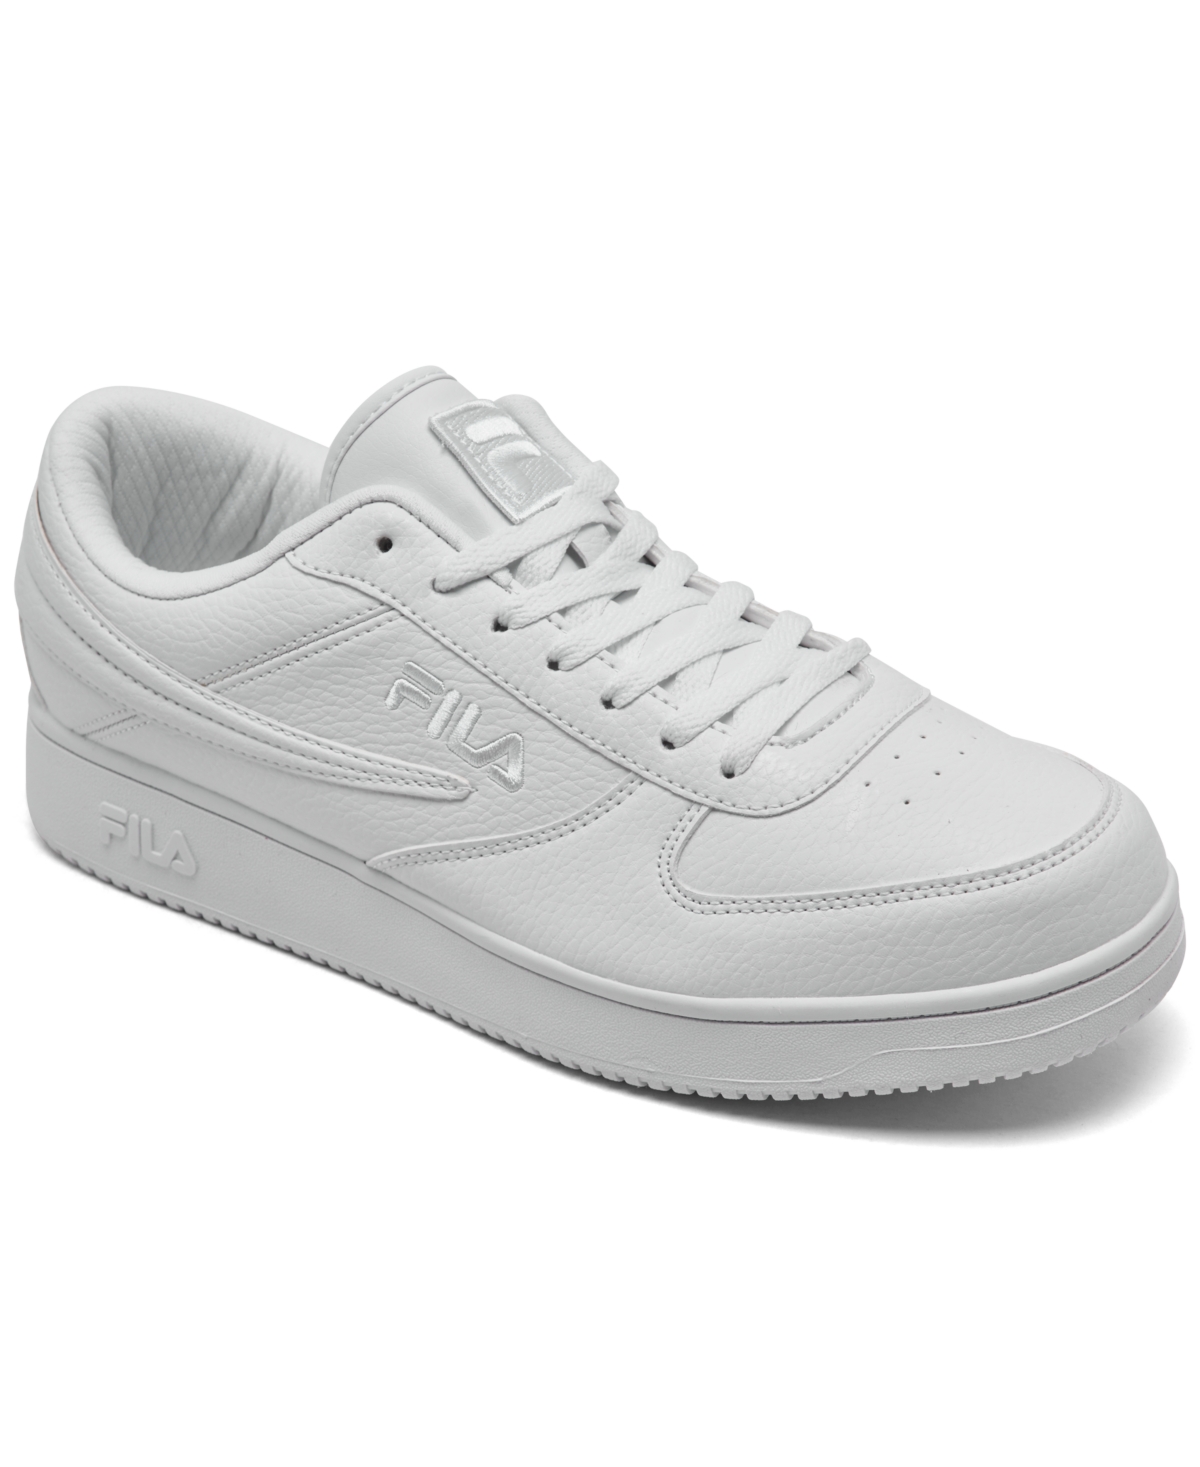 Men's A Low Casual Sneakers from Finish Line - White